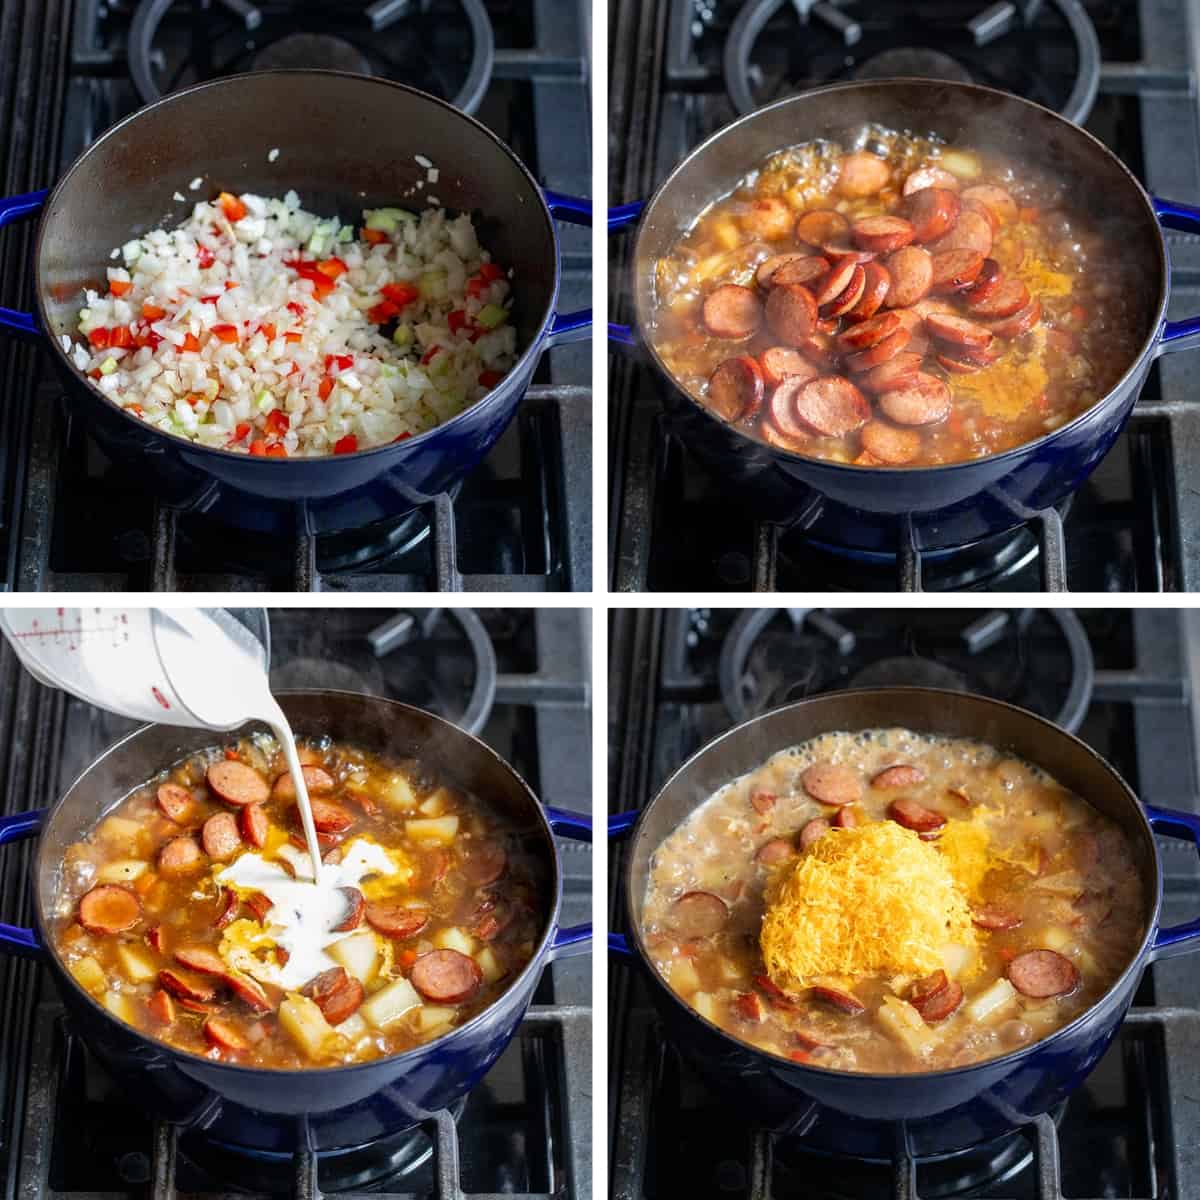 Steps for Making a Cajun Potato Soup in a Skillet Over Heat.